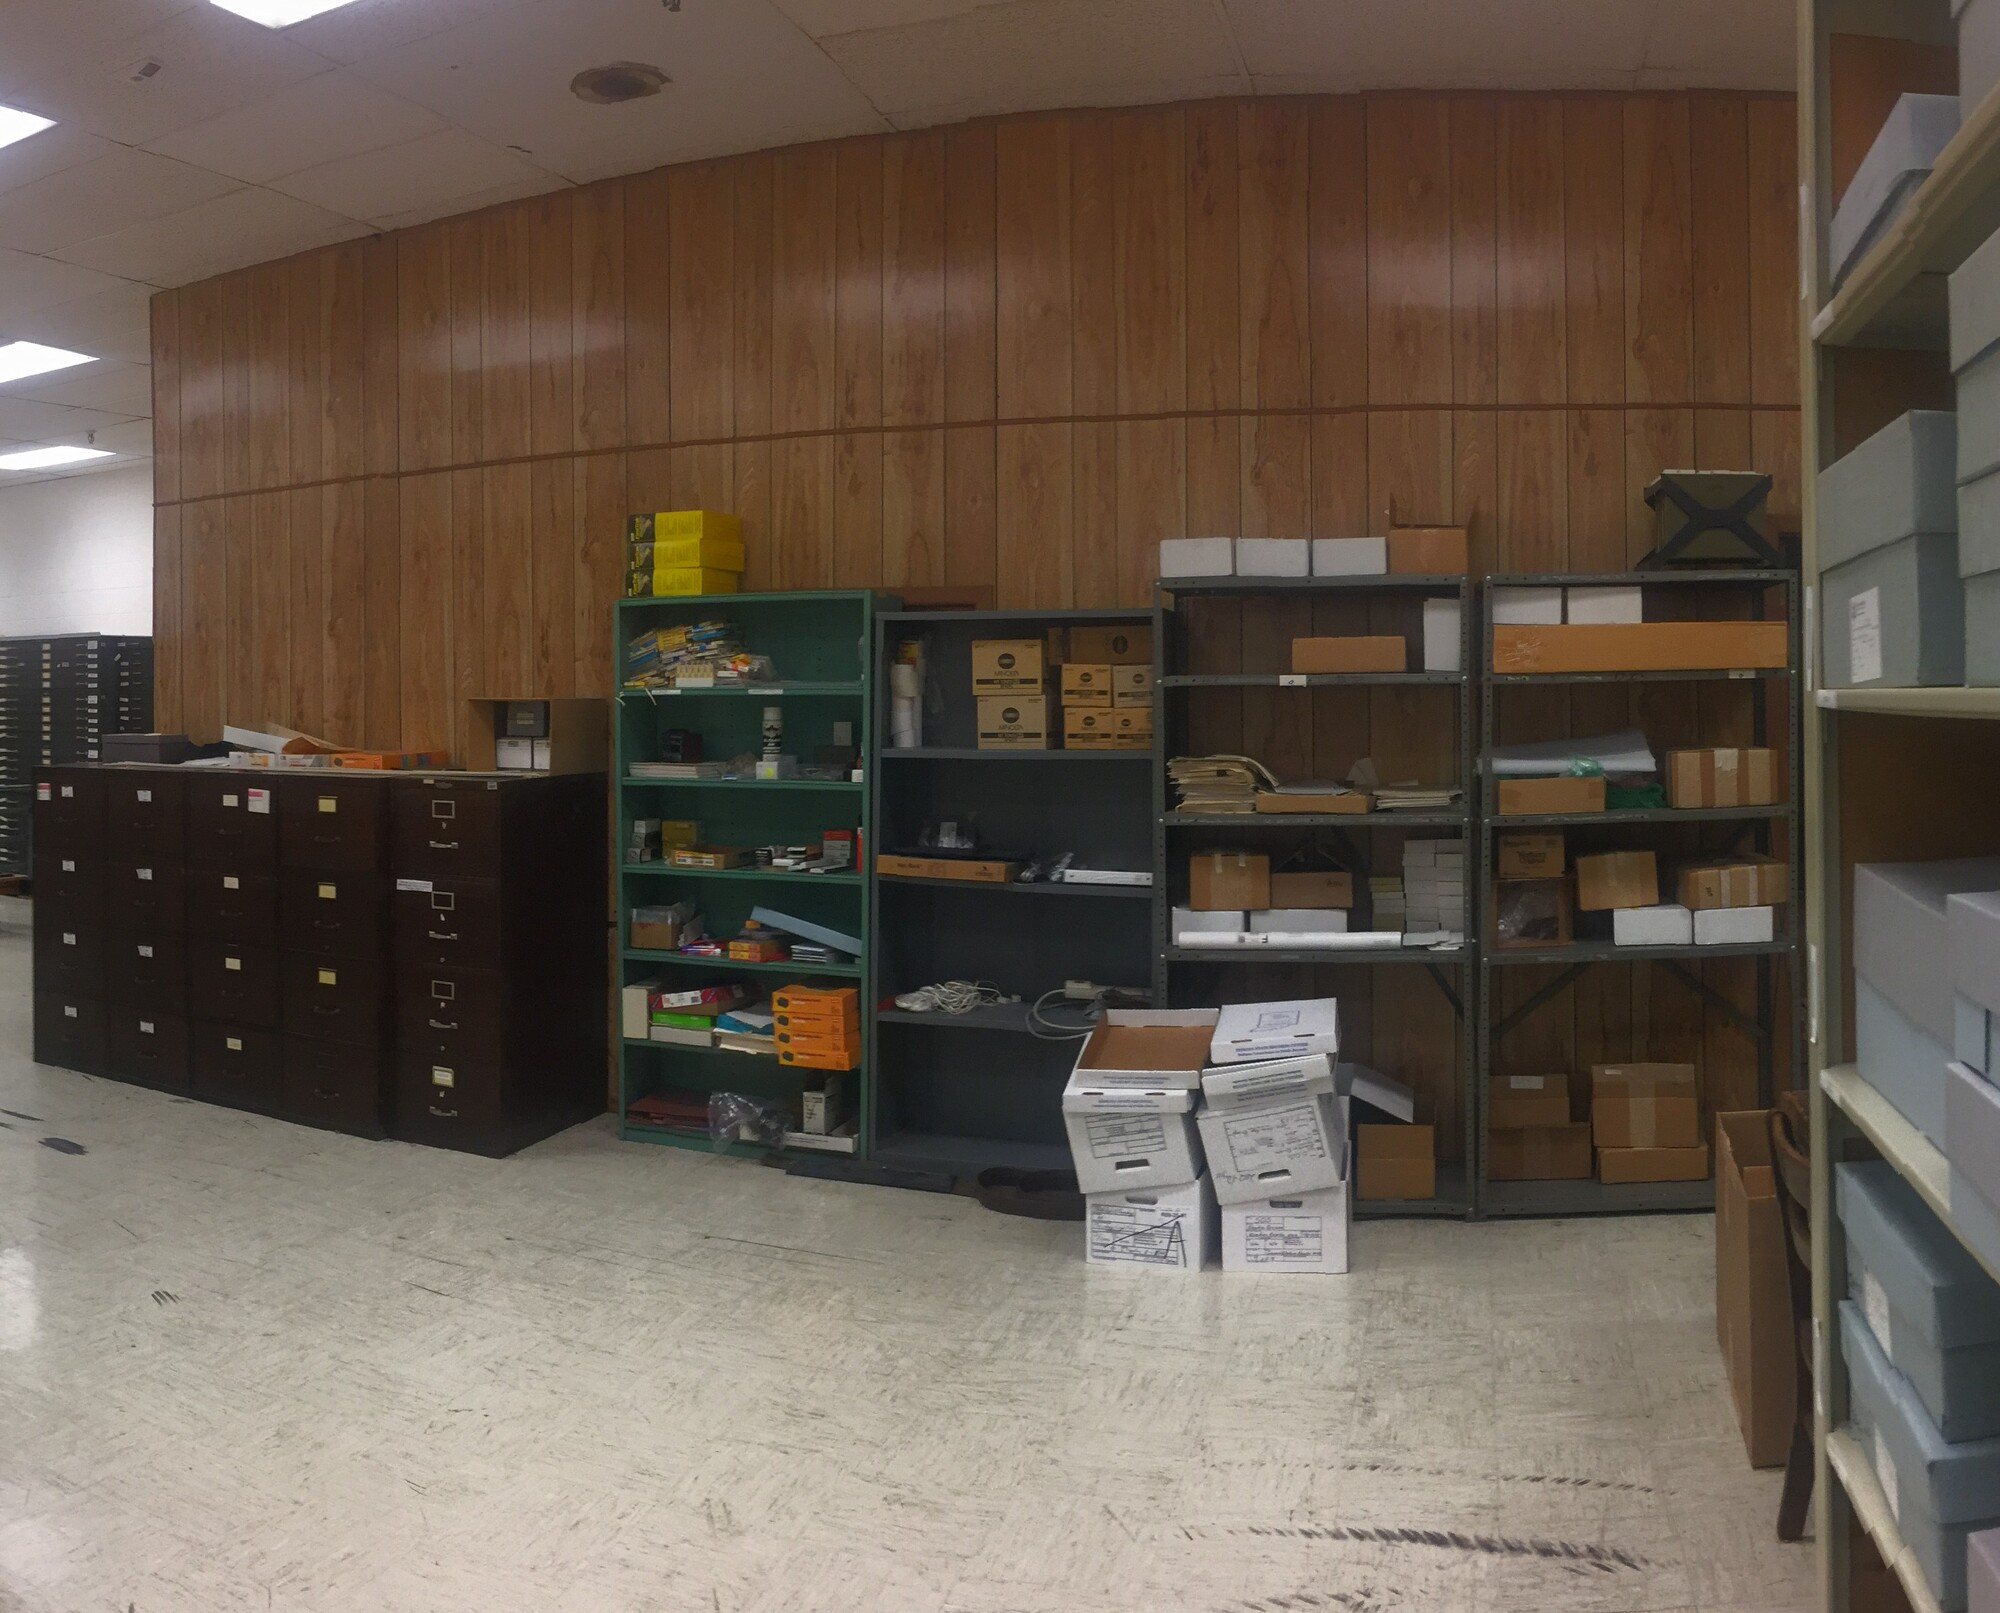 Indiana State Archives - shelves, filing cabinets, boxes